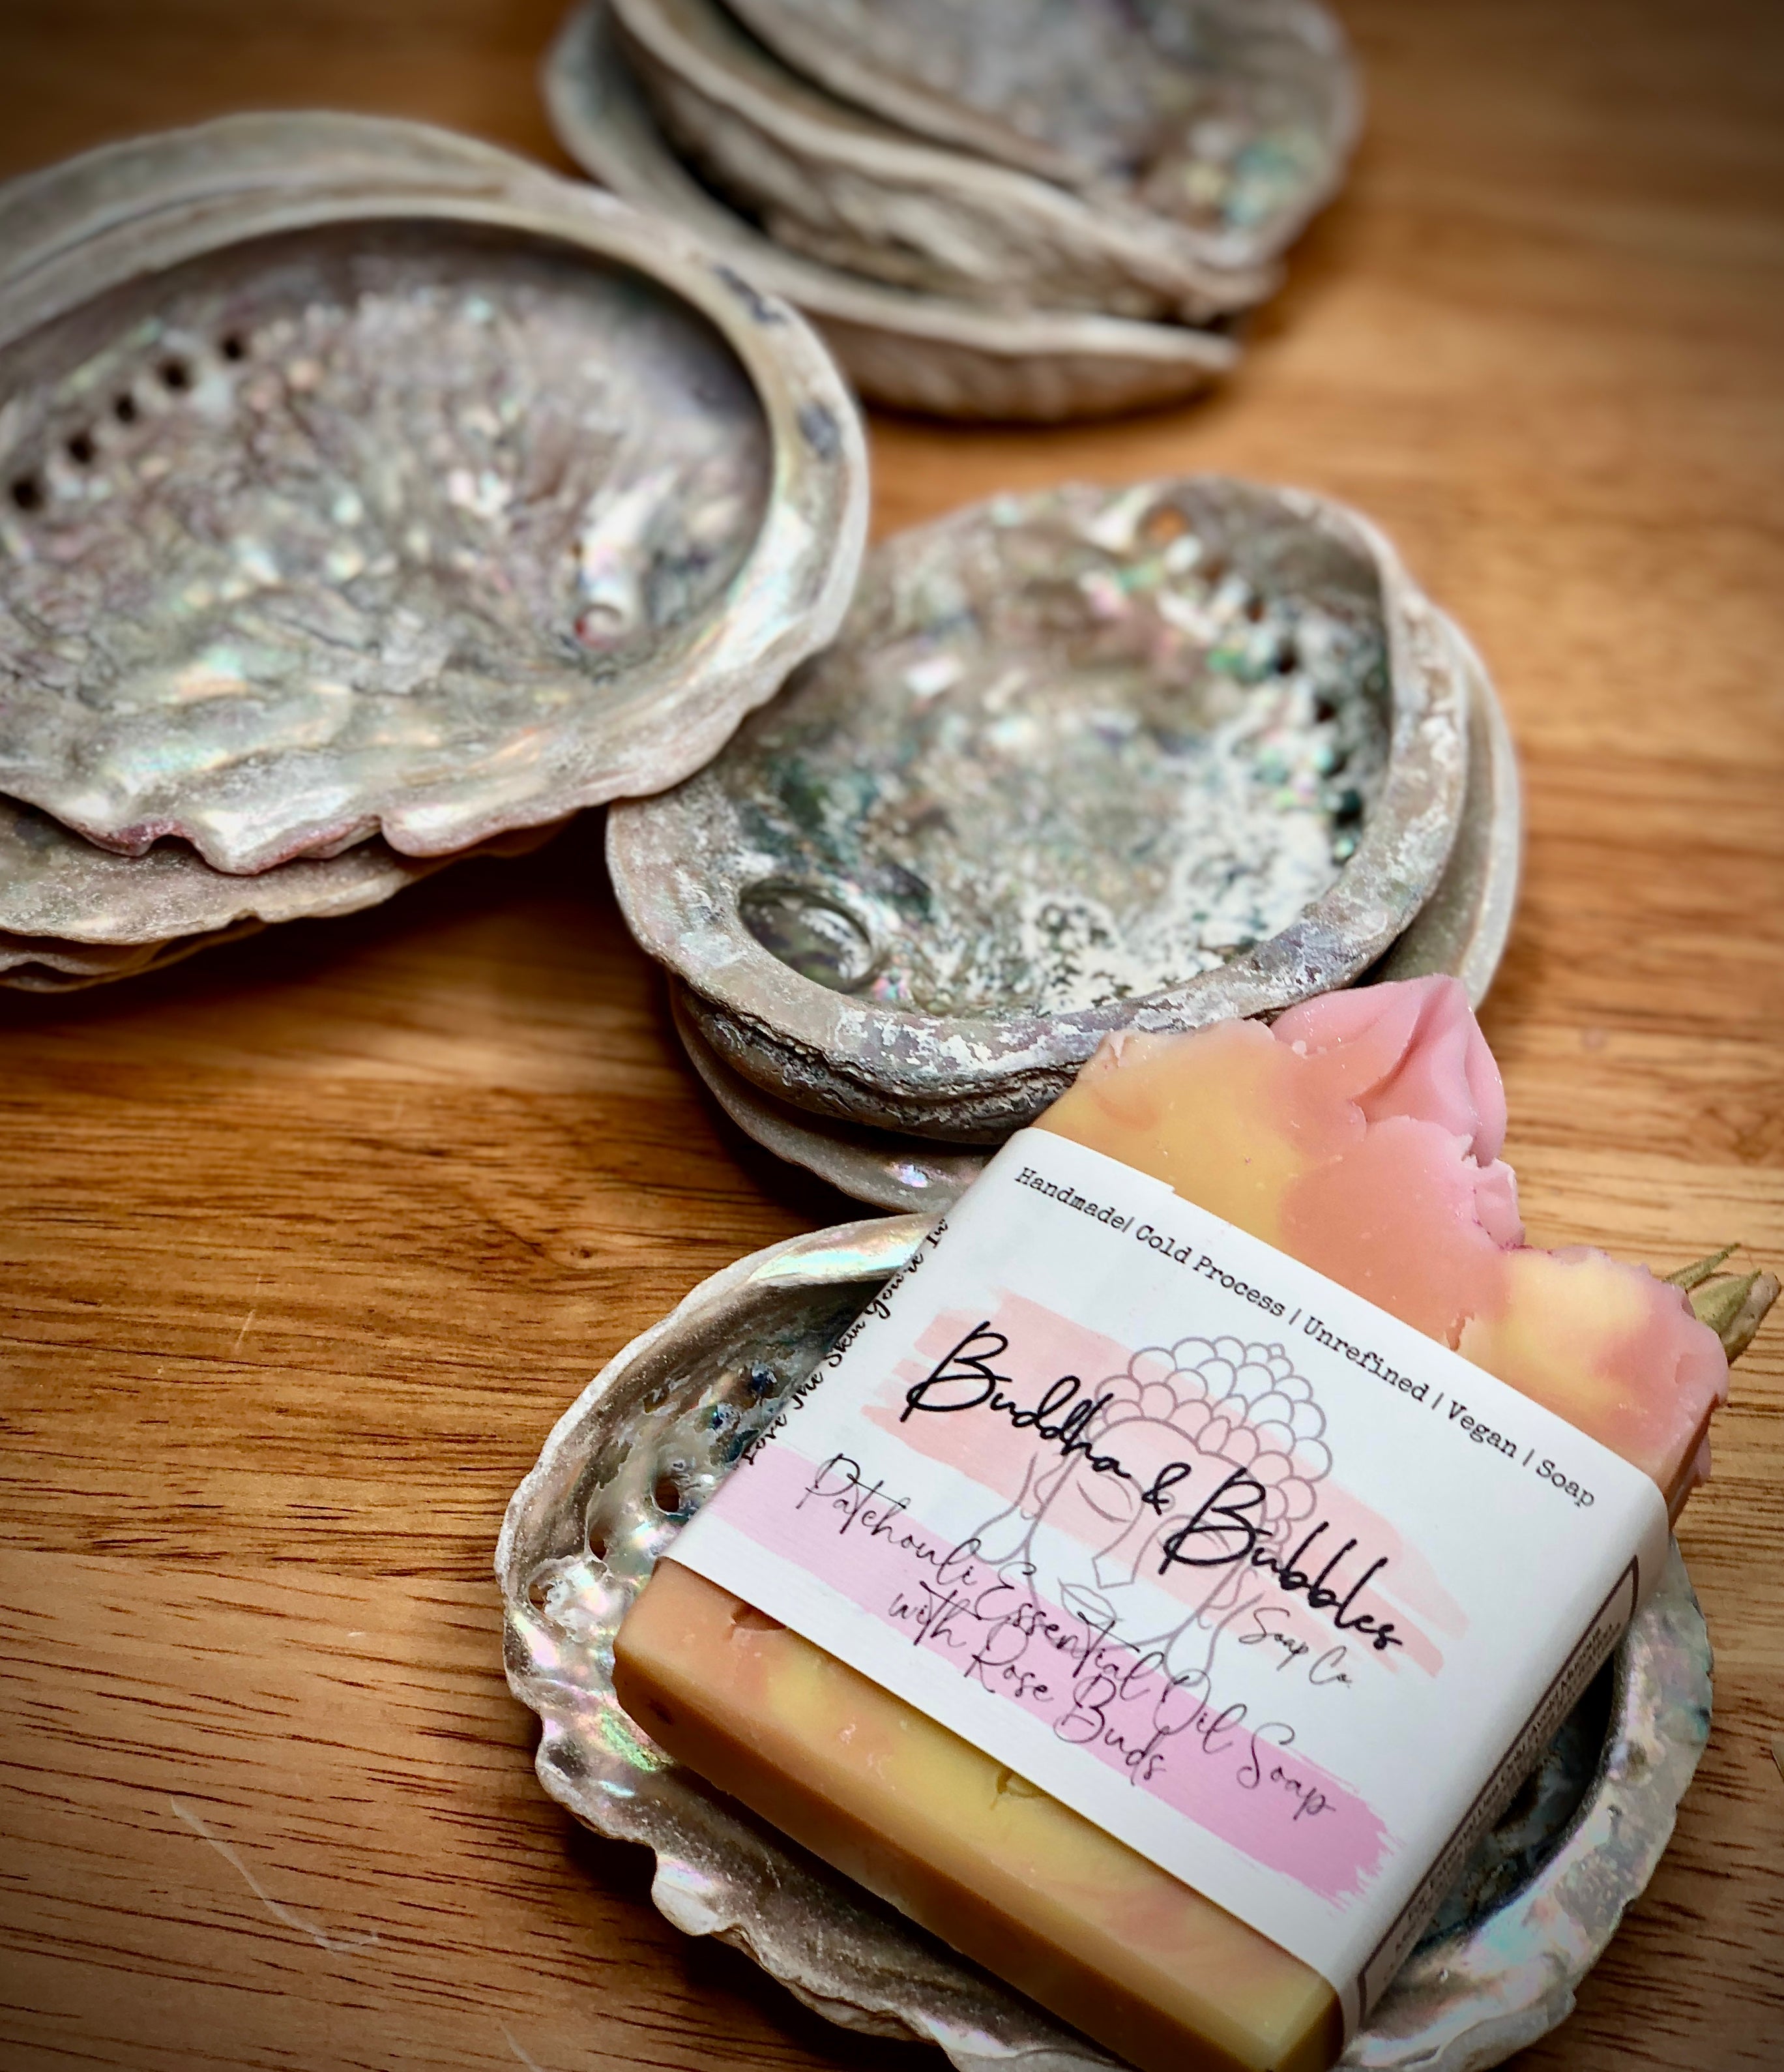 Handmade Soap Rose and Patchouli Essential Oil